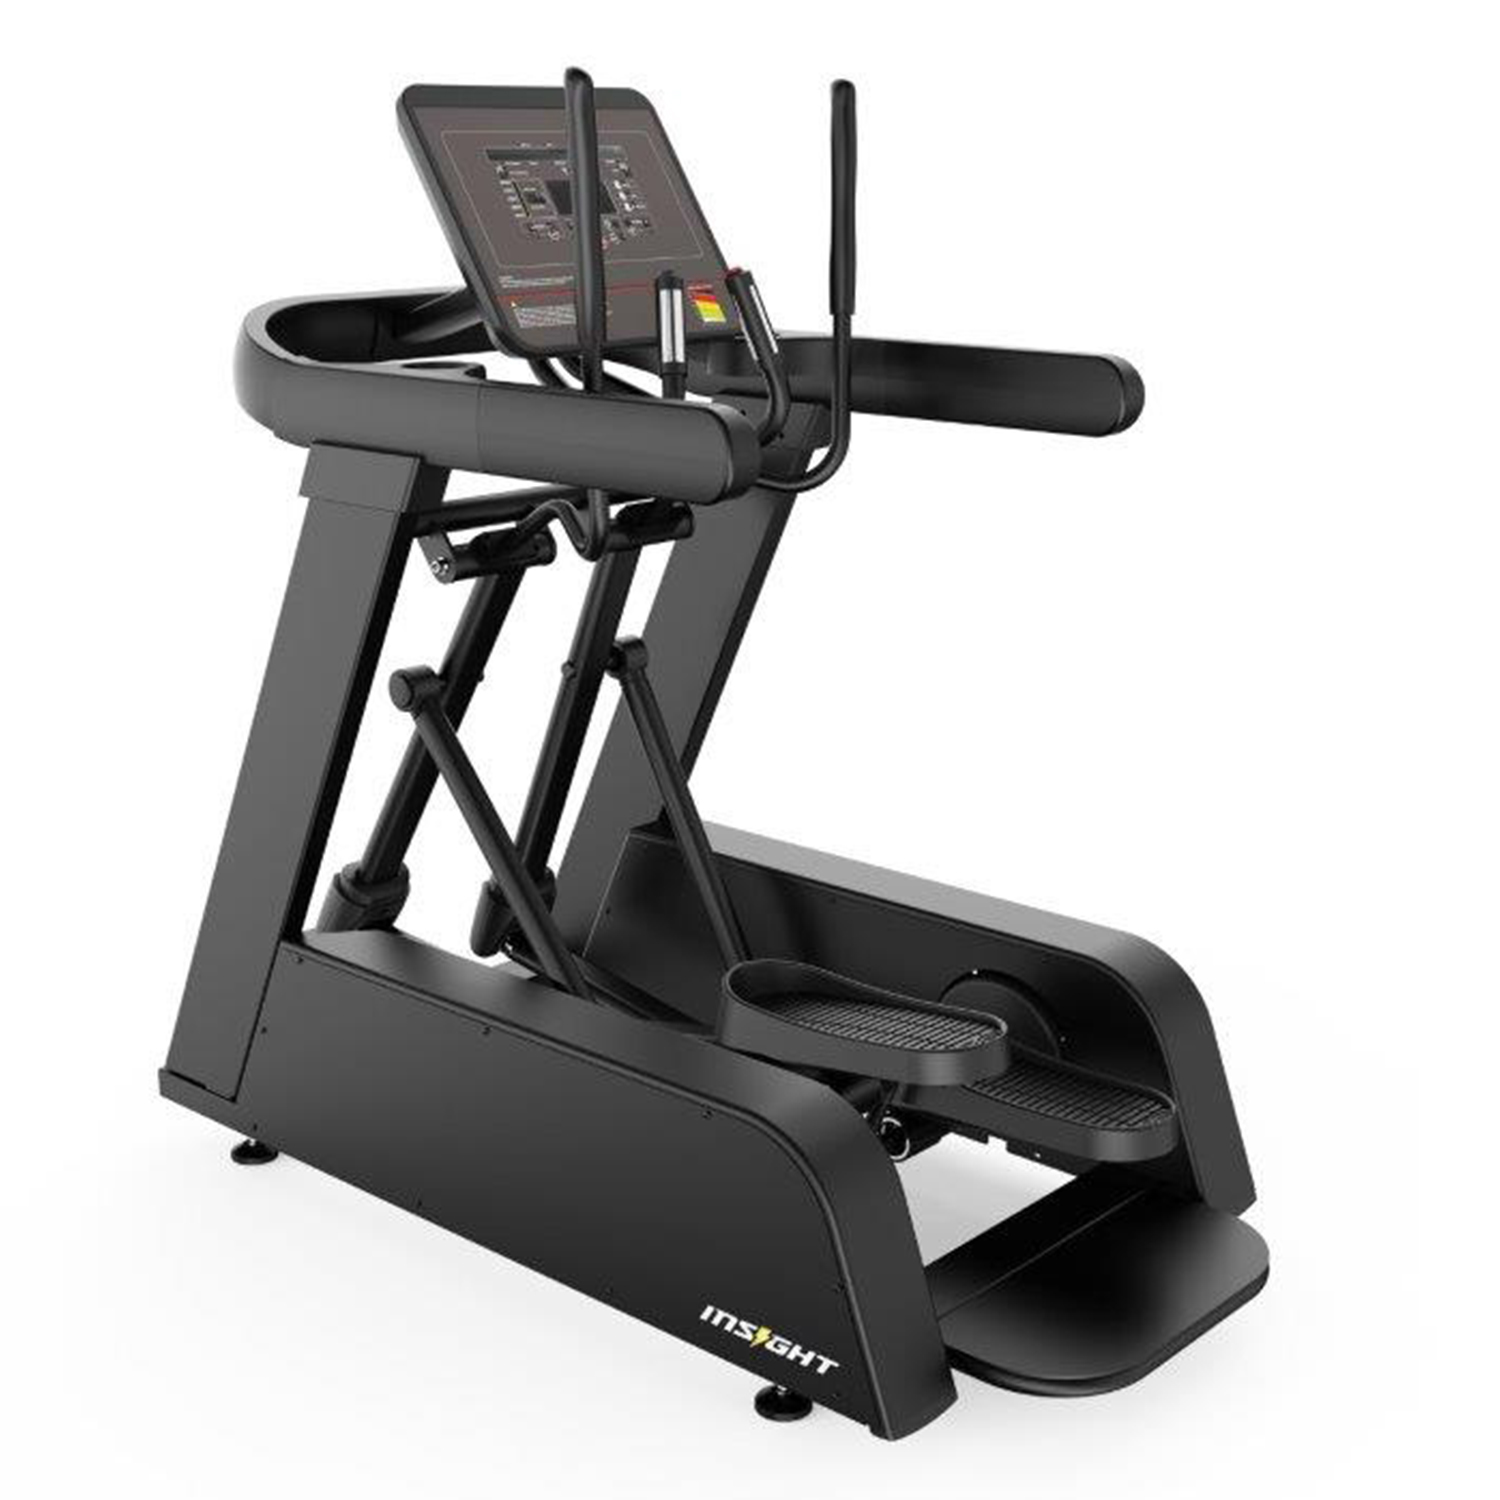 Insight Fitness Commercial CE5500 Elliptical Cross-trainer